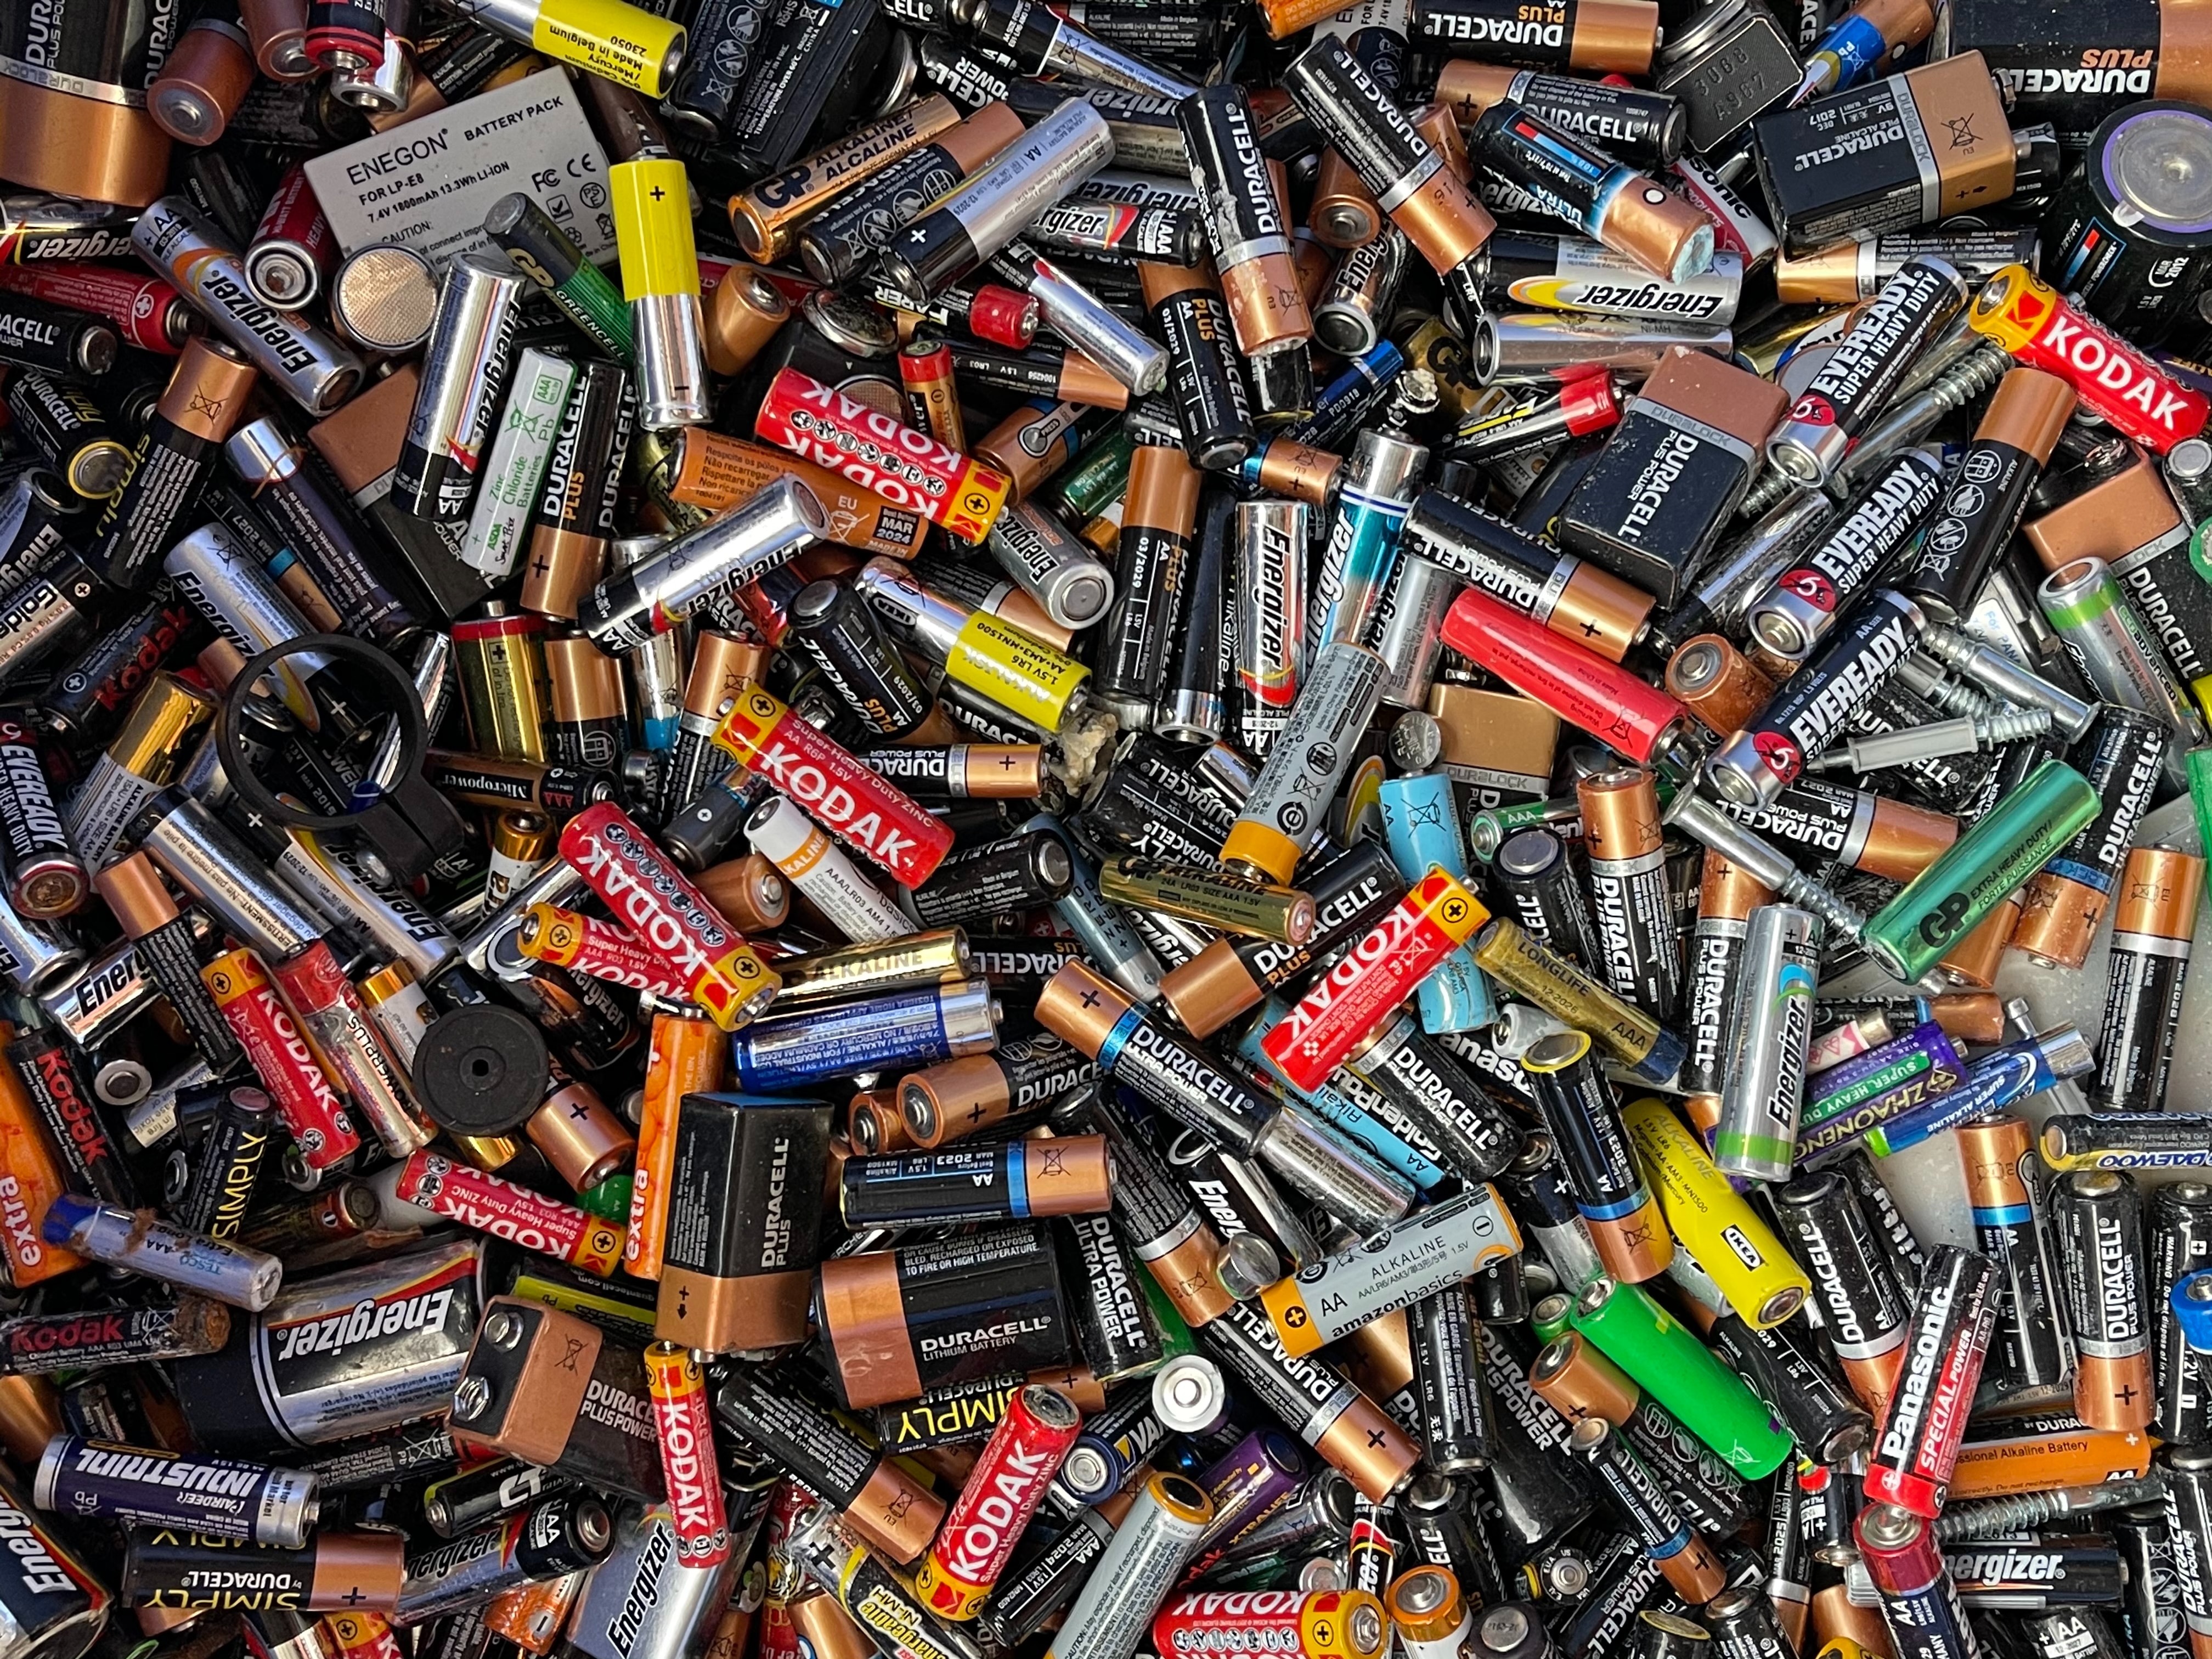 Countless old batteries